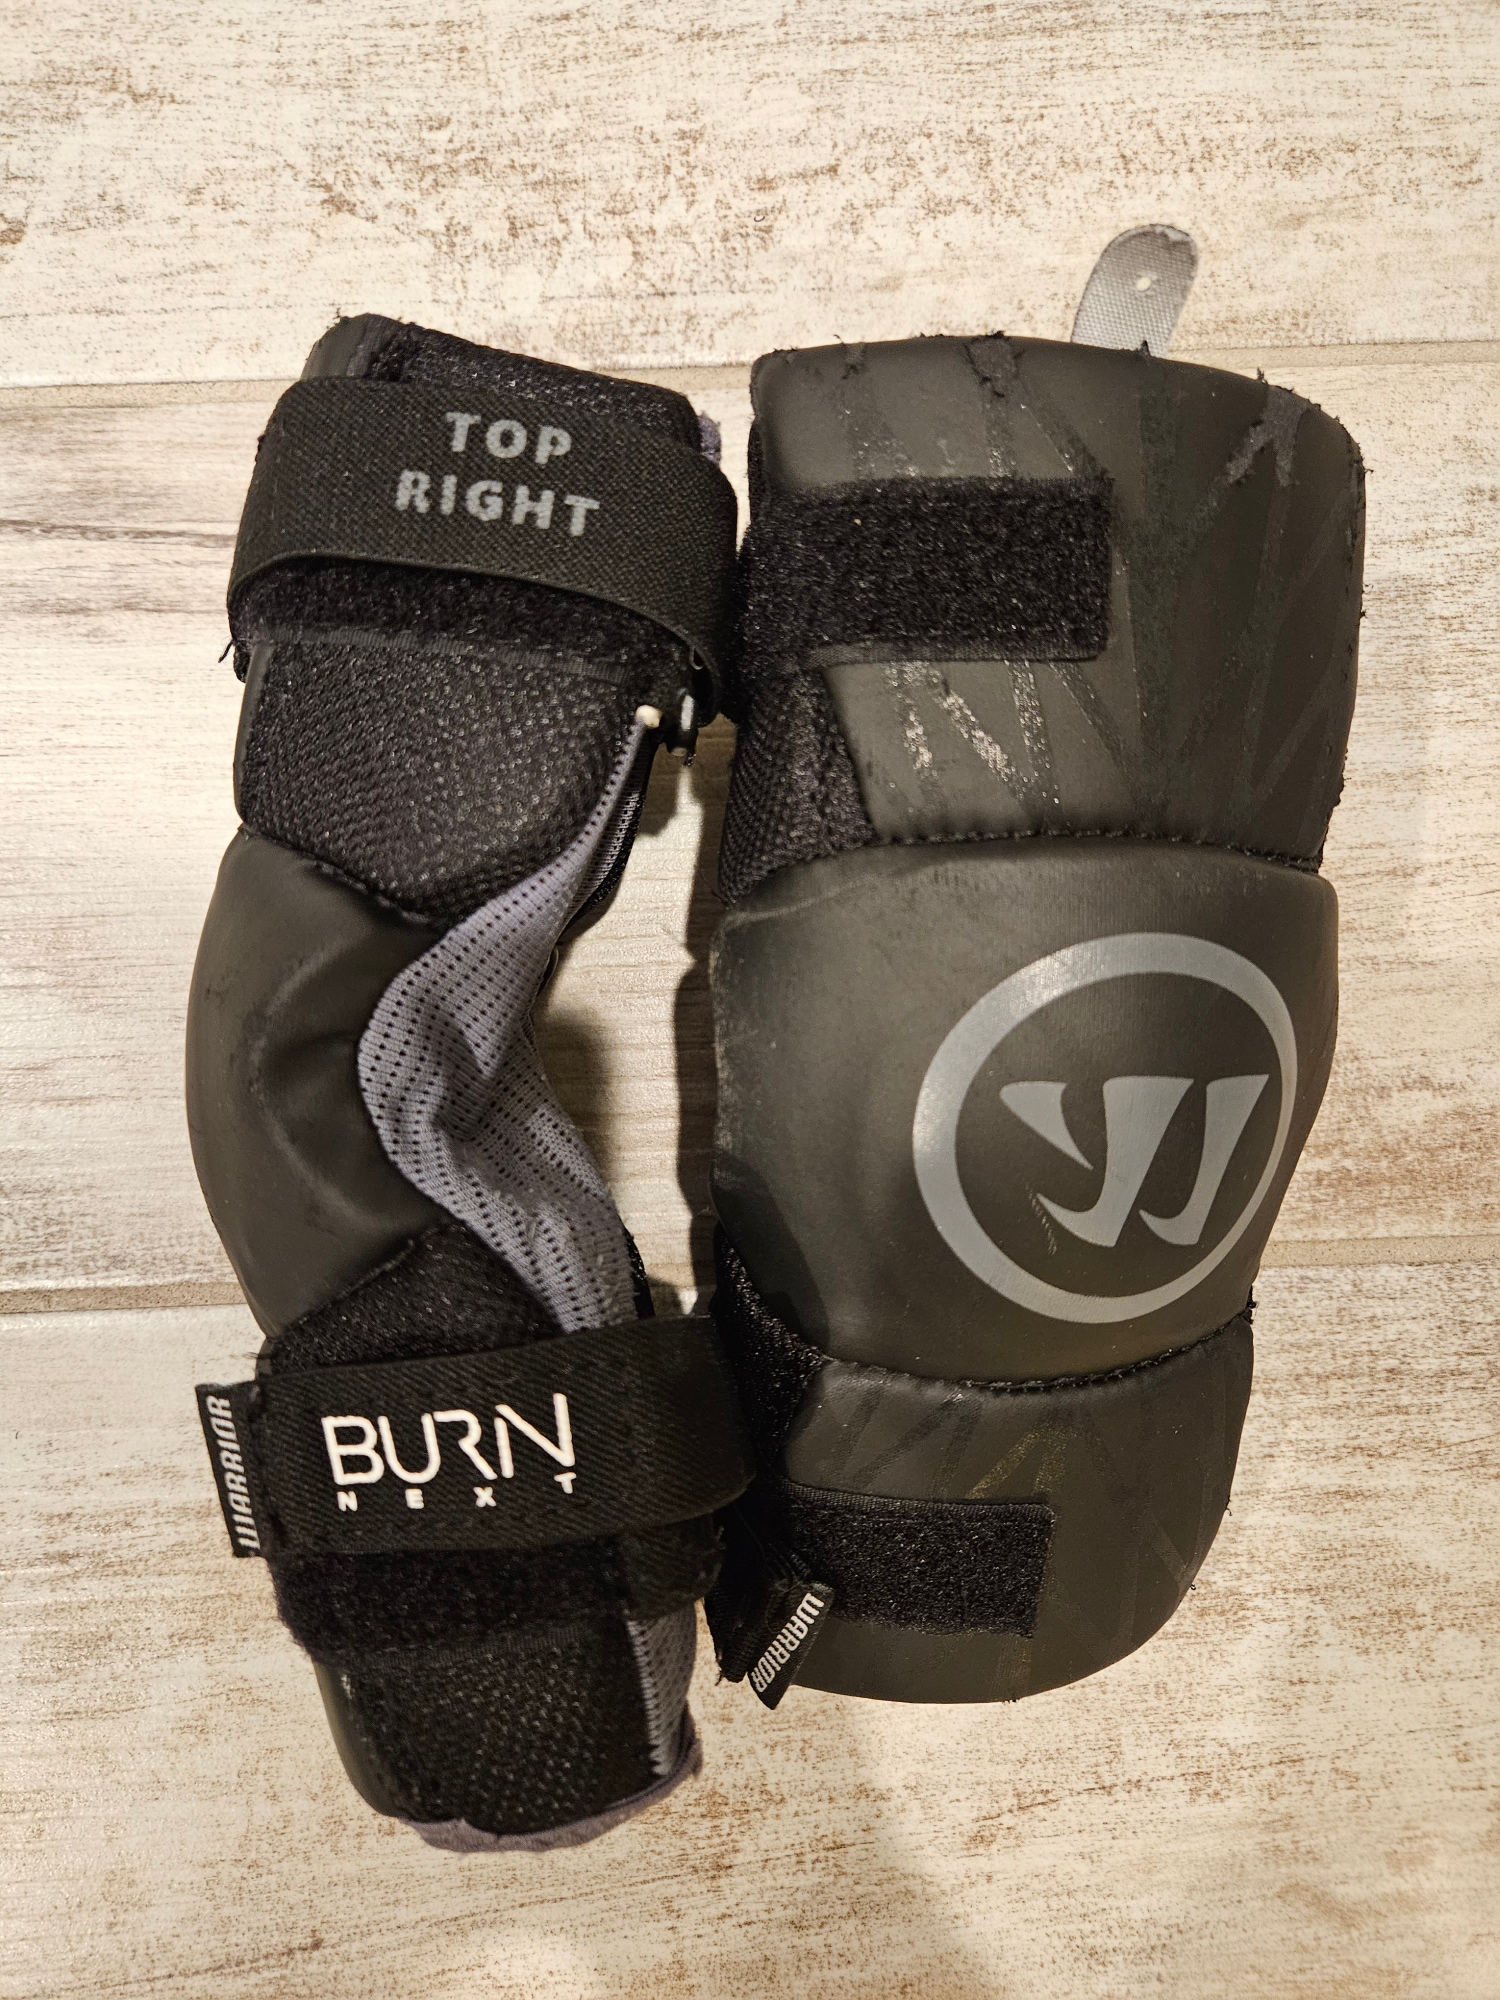 Youth Used Large Warrior Burn next Arm Pads